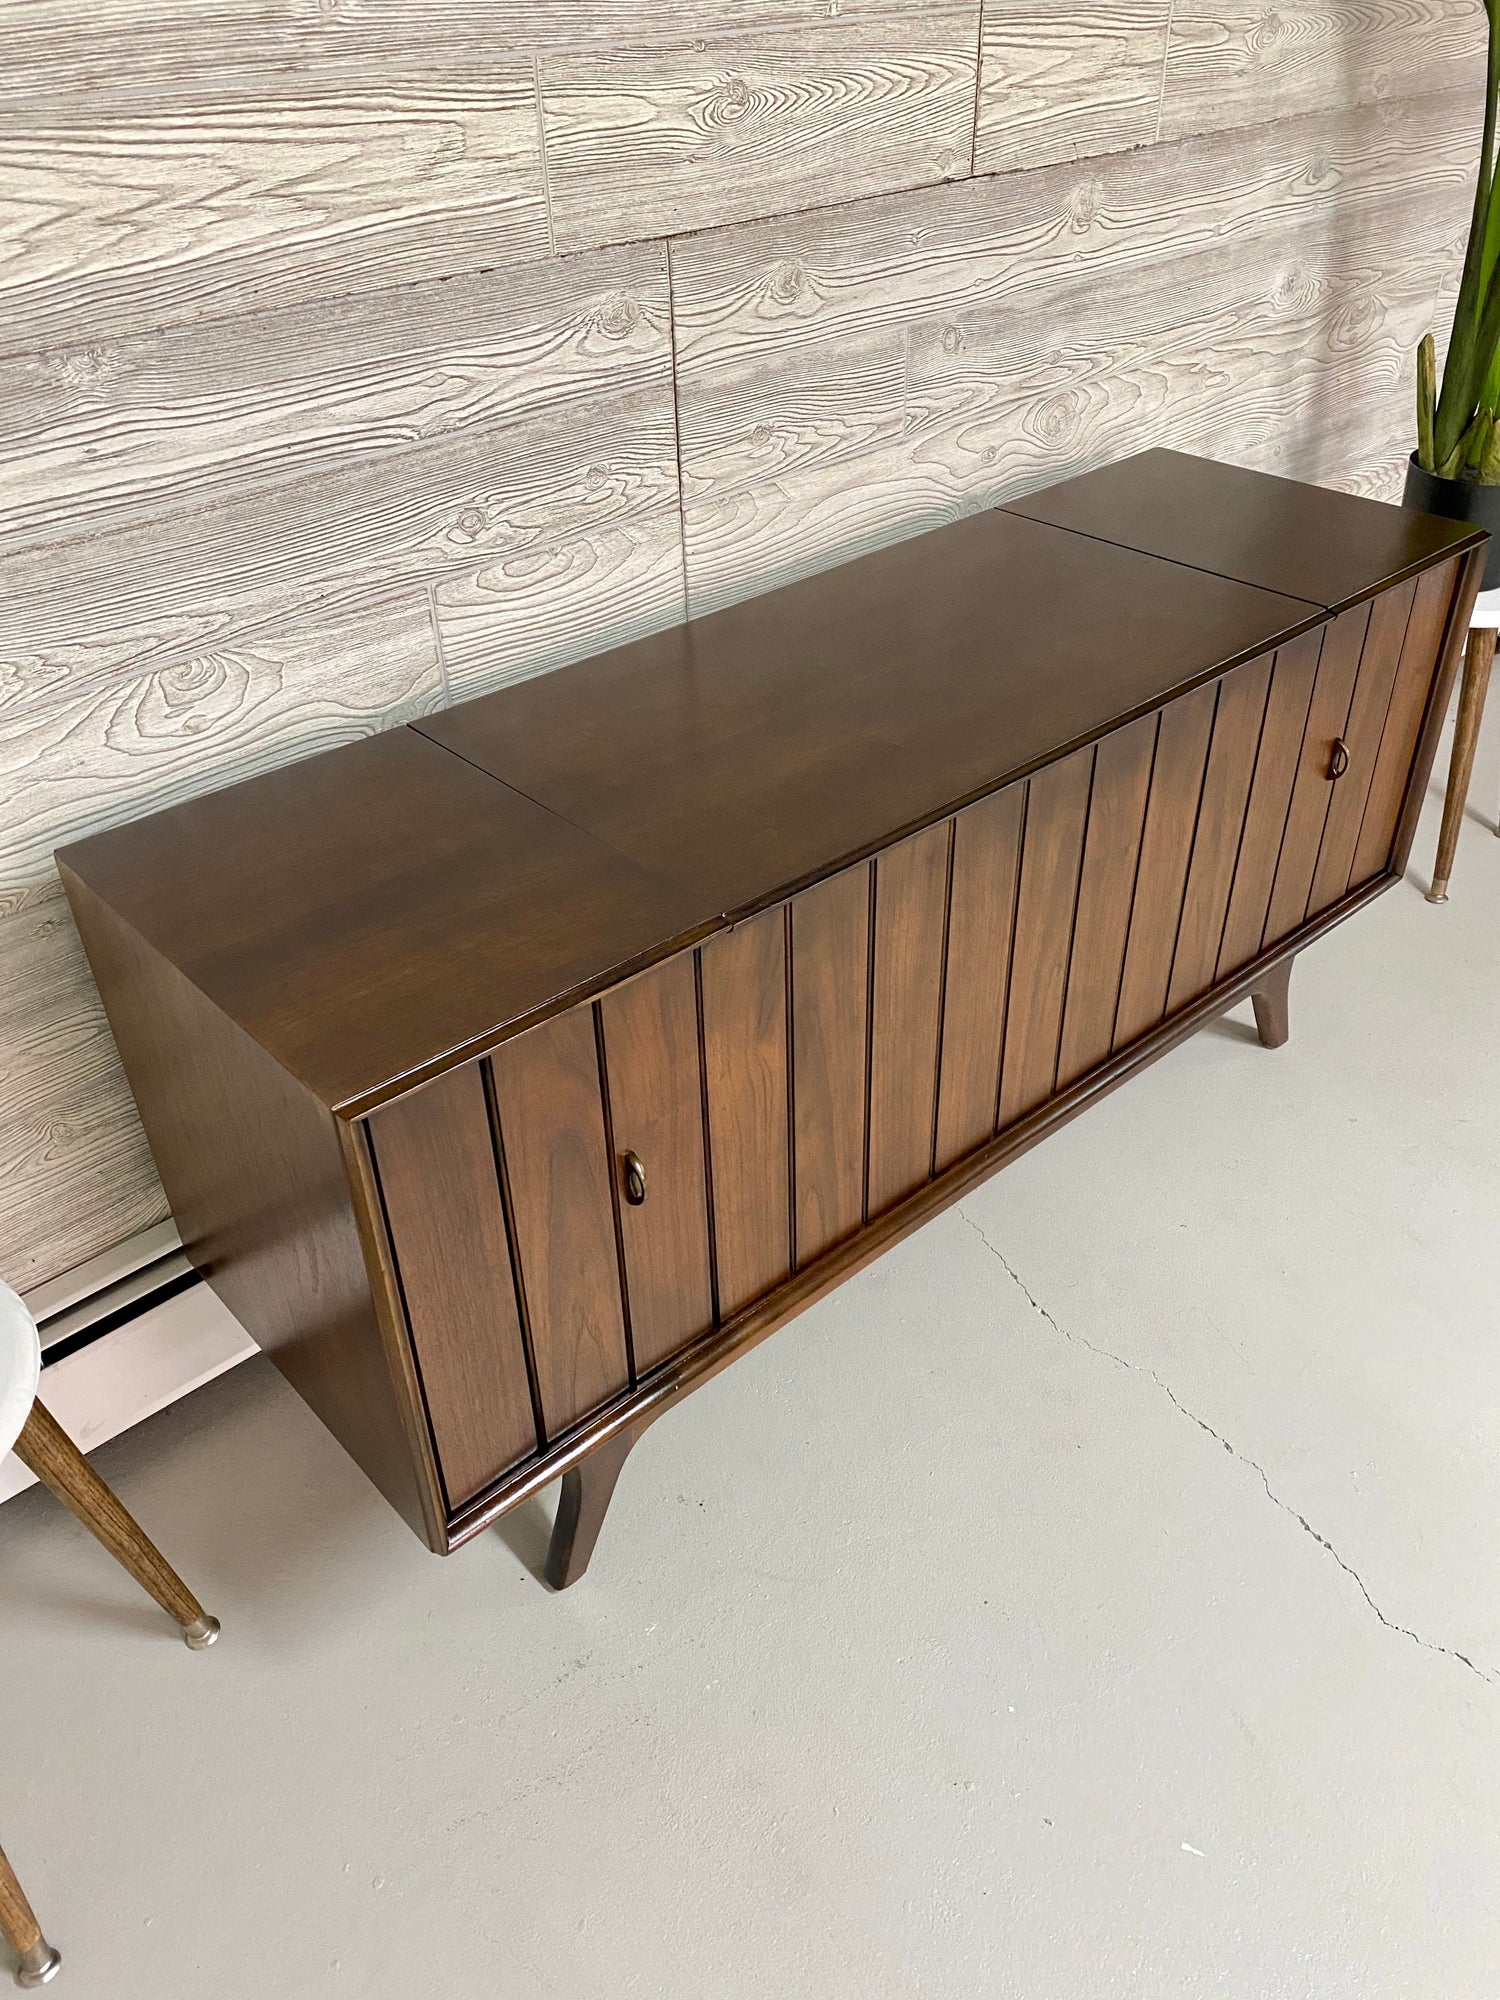 **SOLD OUT** ZENITH Louver Door 60s Record Player Changer Stereo Console AM FM Bluetooth Alexa The Vintedge Co.